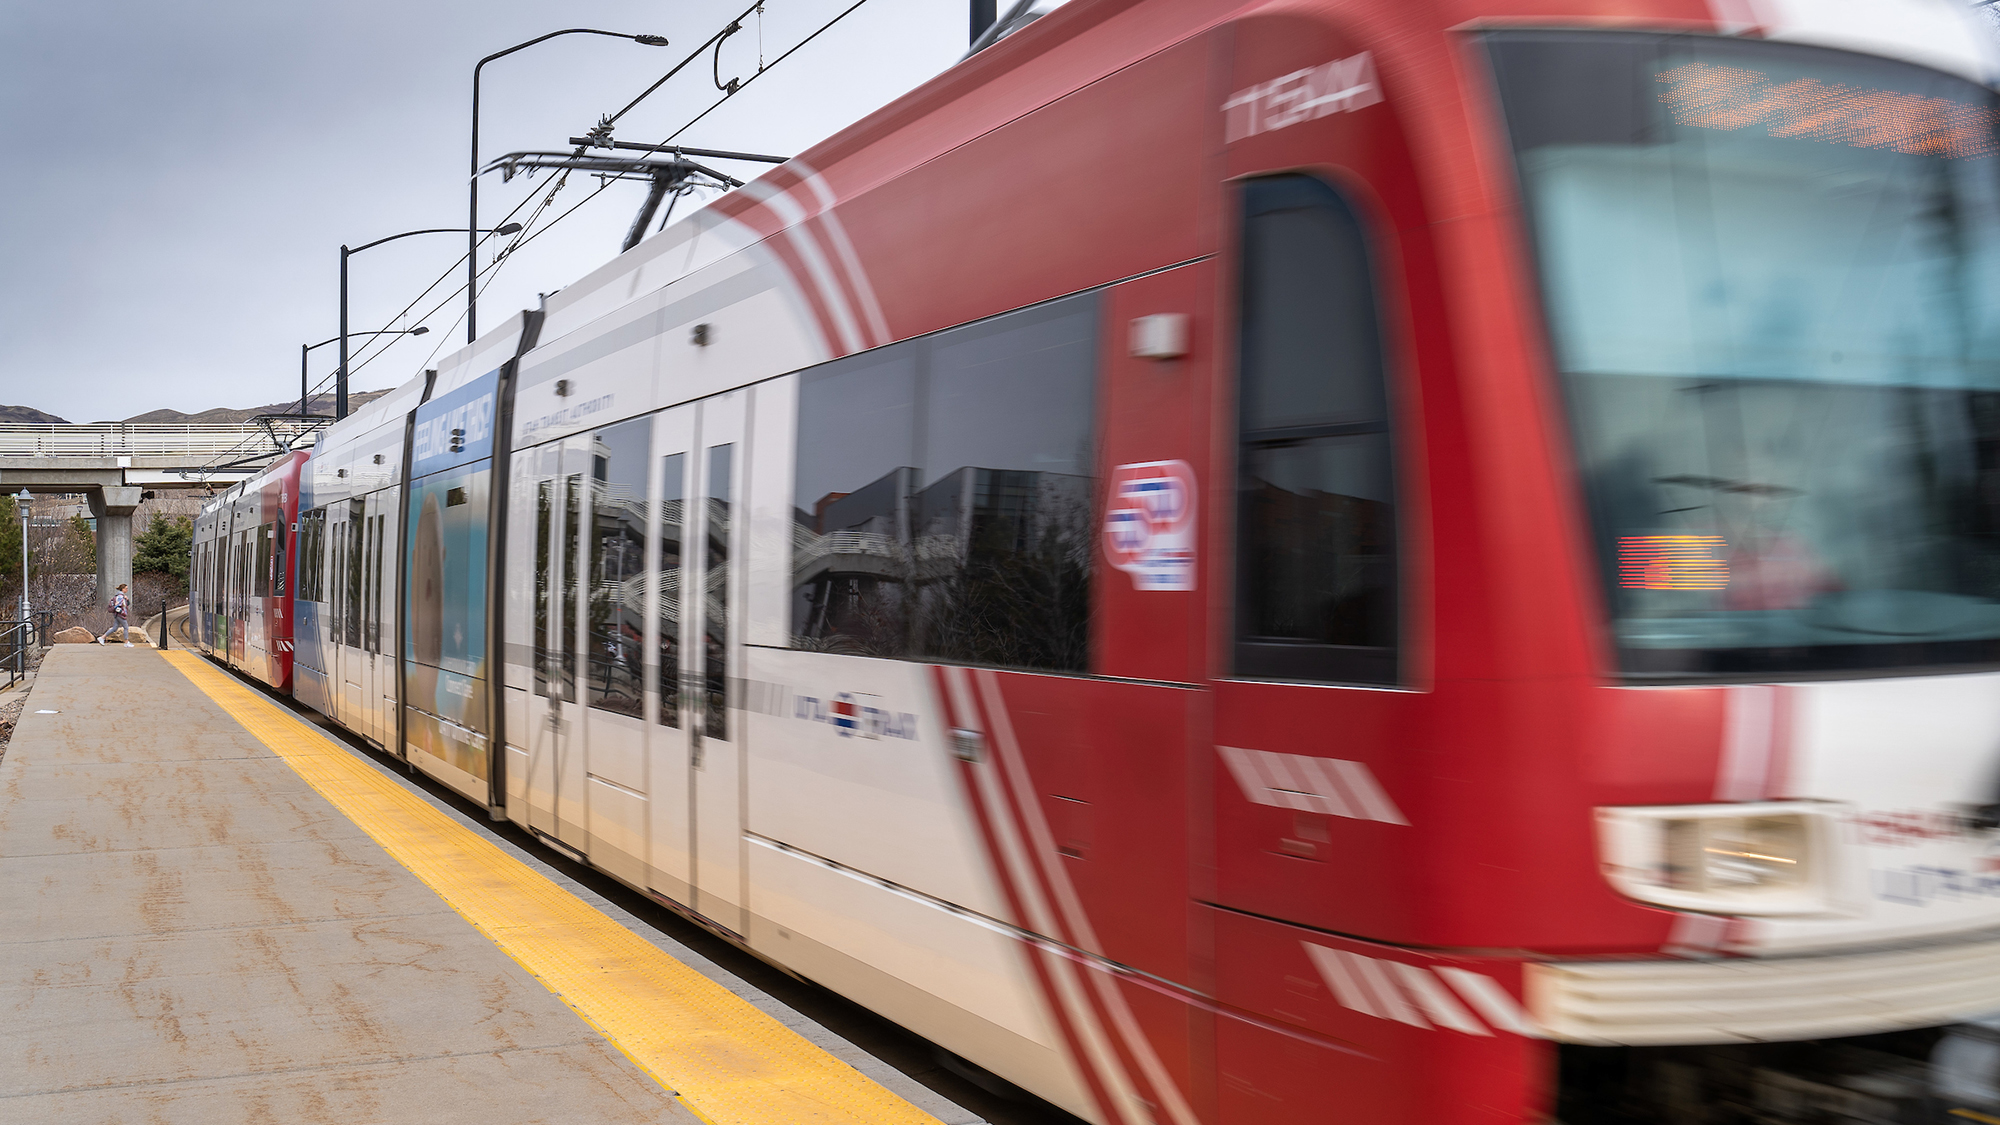 A red and white TRAX light rail train blurred by motion